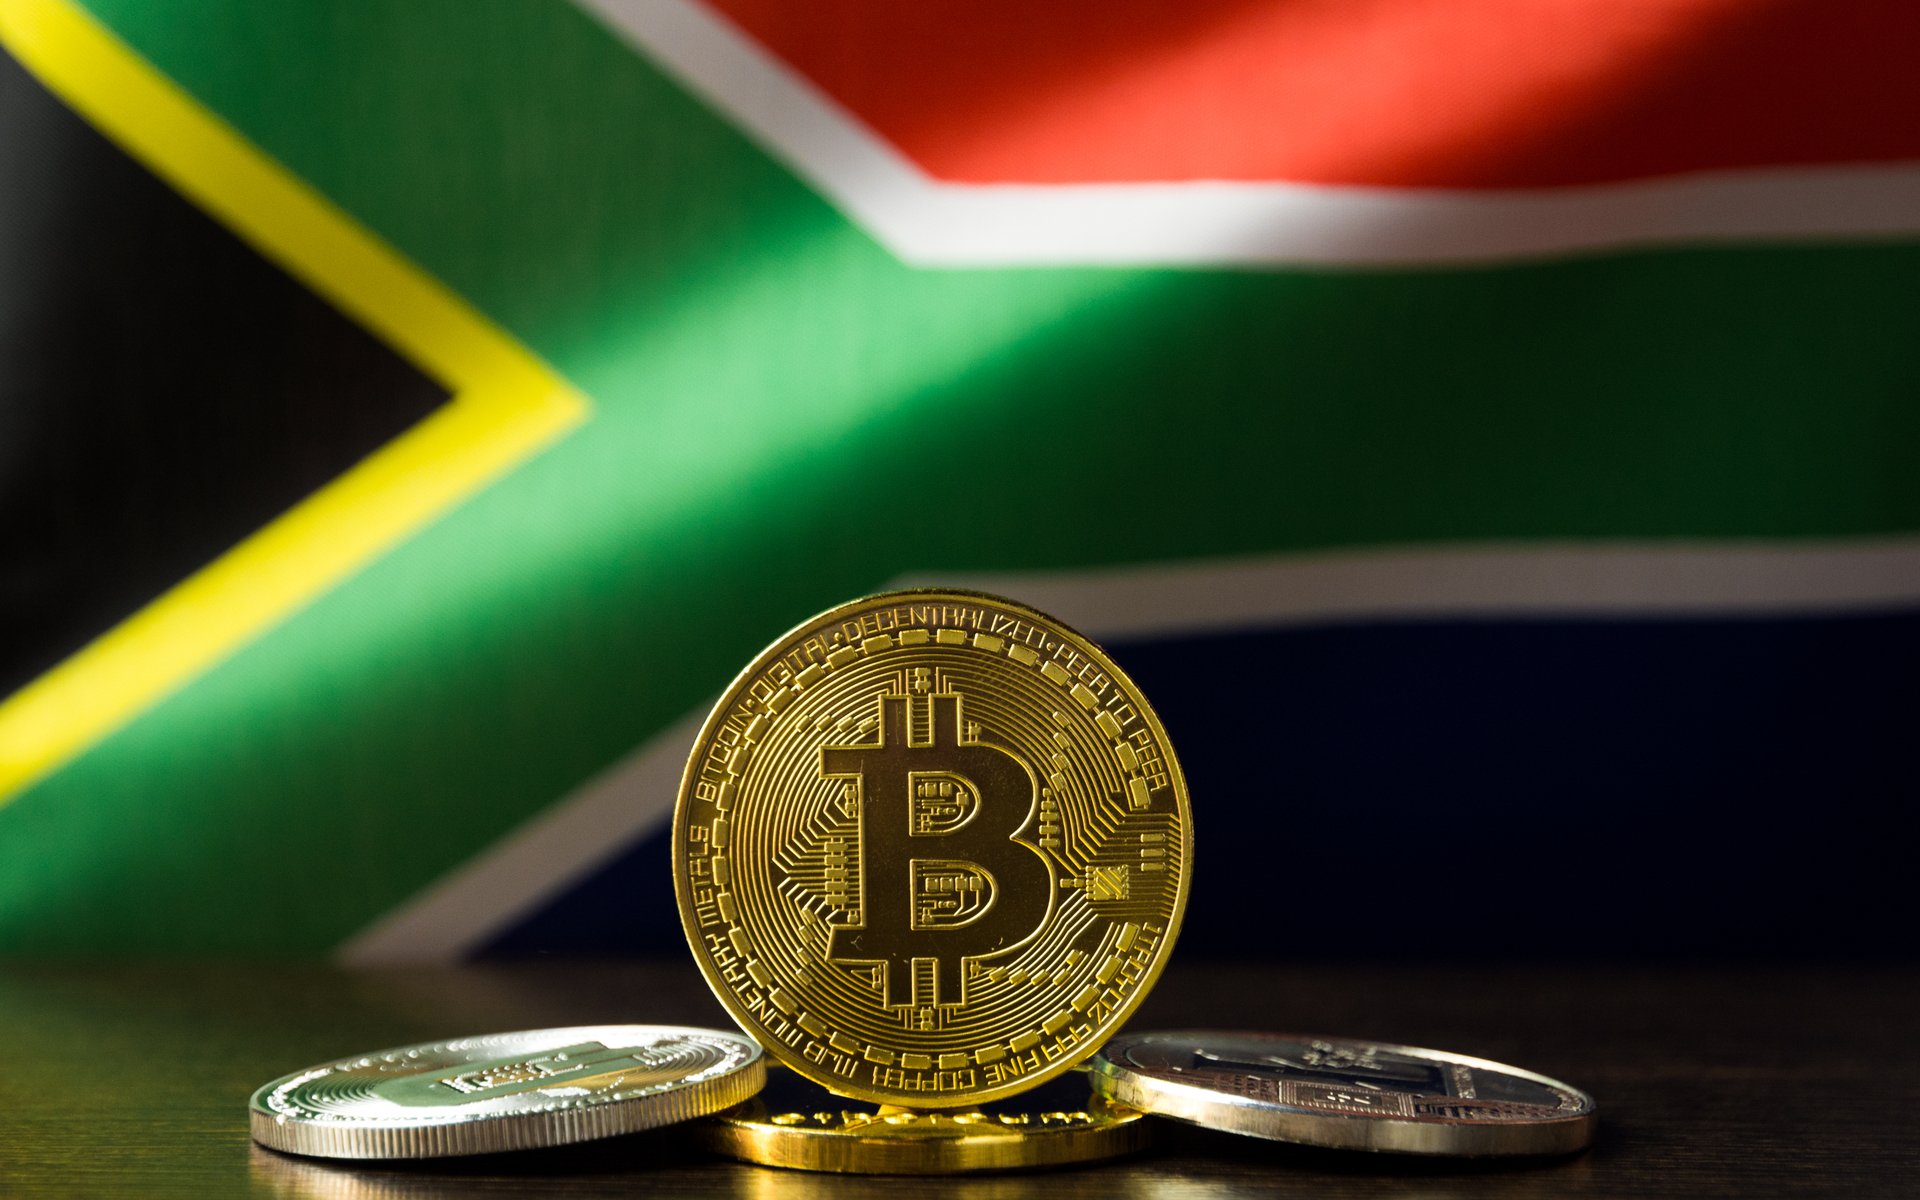 Bitcoin Popularity Surges in South Africa Amid Political, Economic Turmoil 